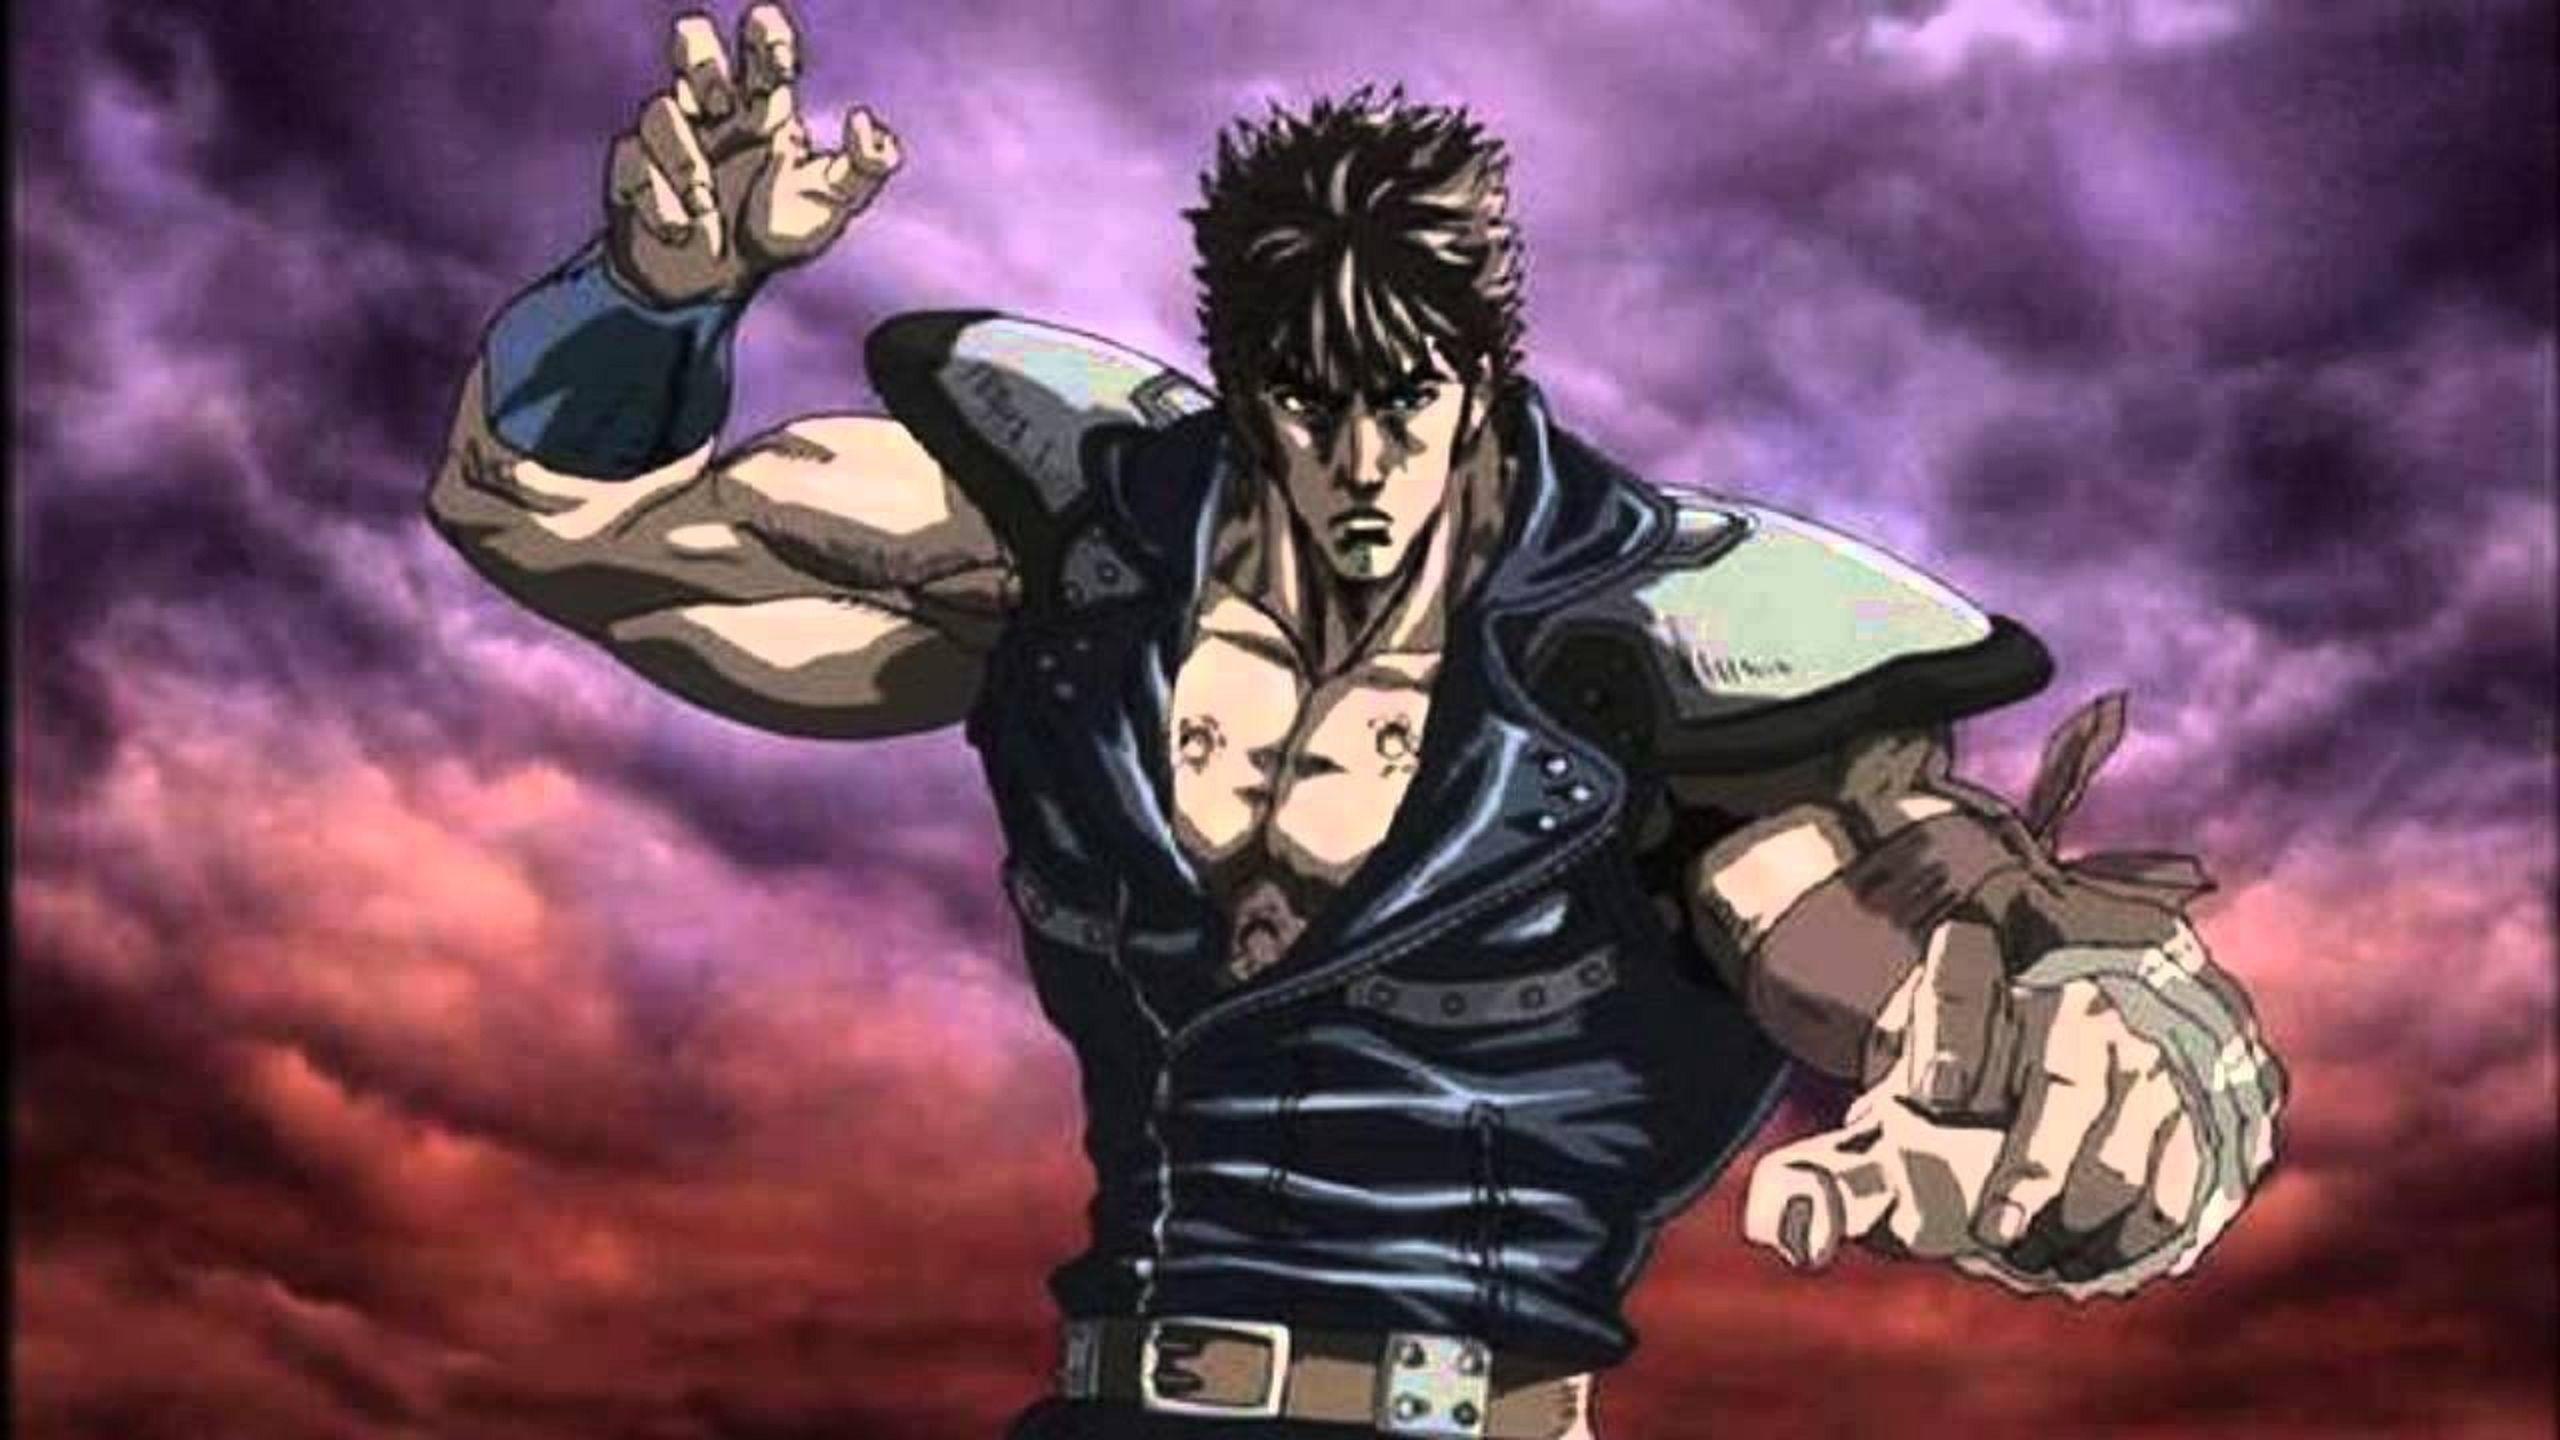 Featured image of post 1080P Kenshiro Wallpaper Search free kenshiro ringtones and wallpapers on zedge and personalize your phone to suit you